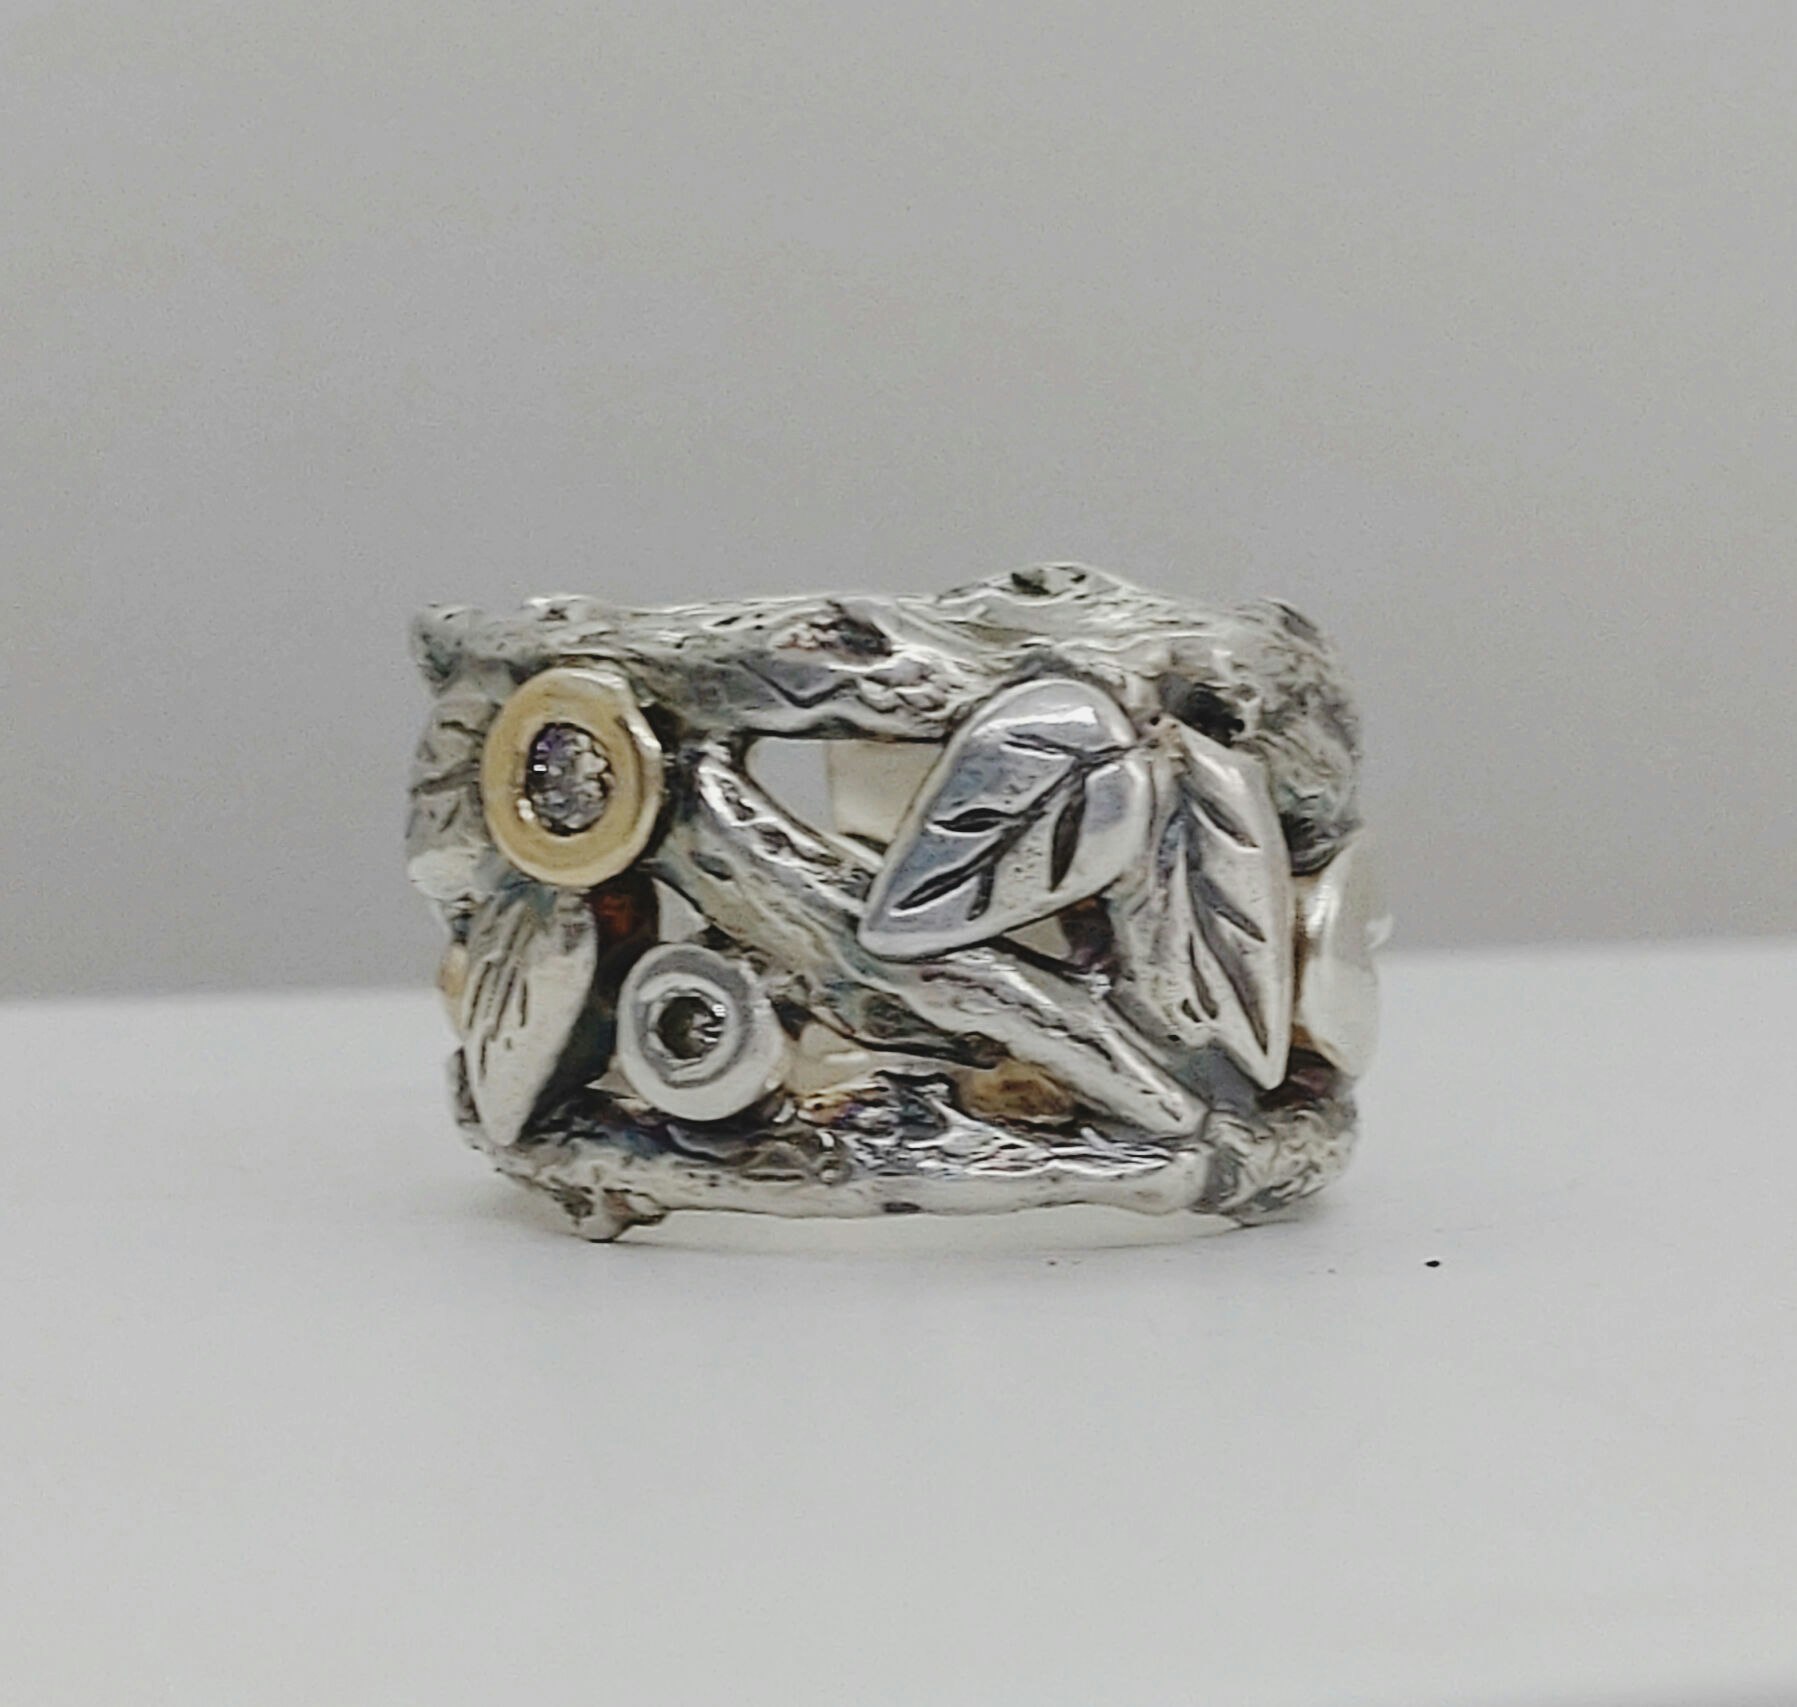 'Anna' ring - one of a kind